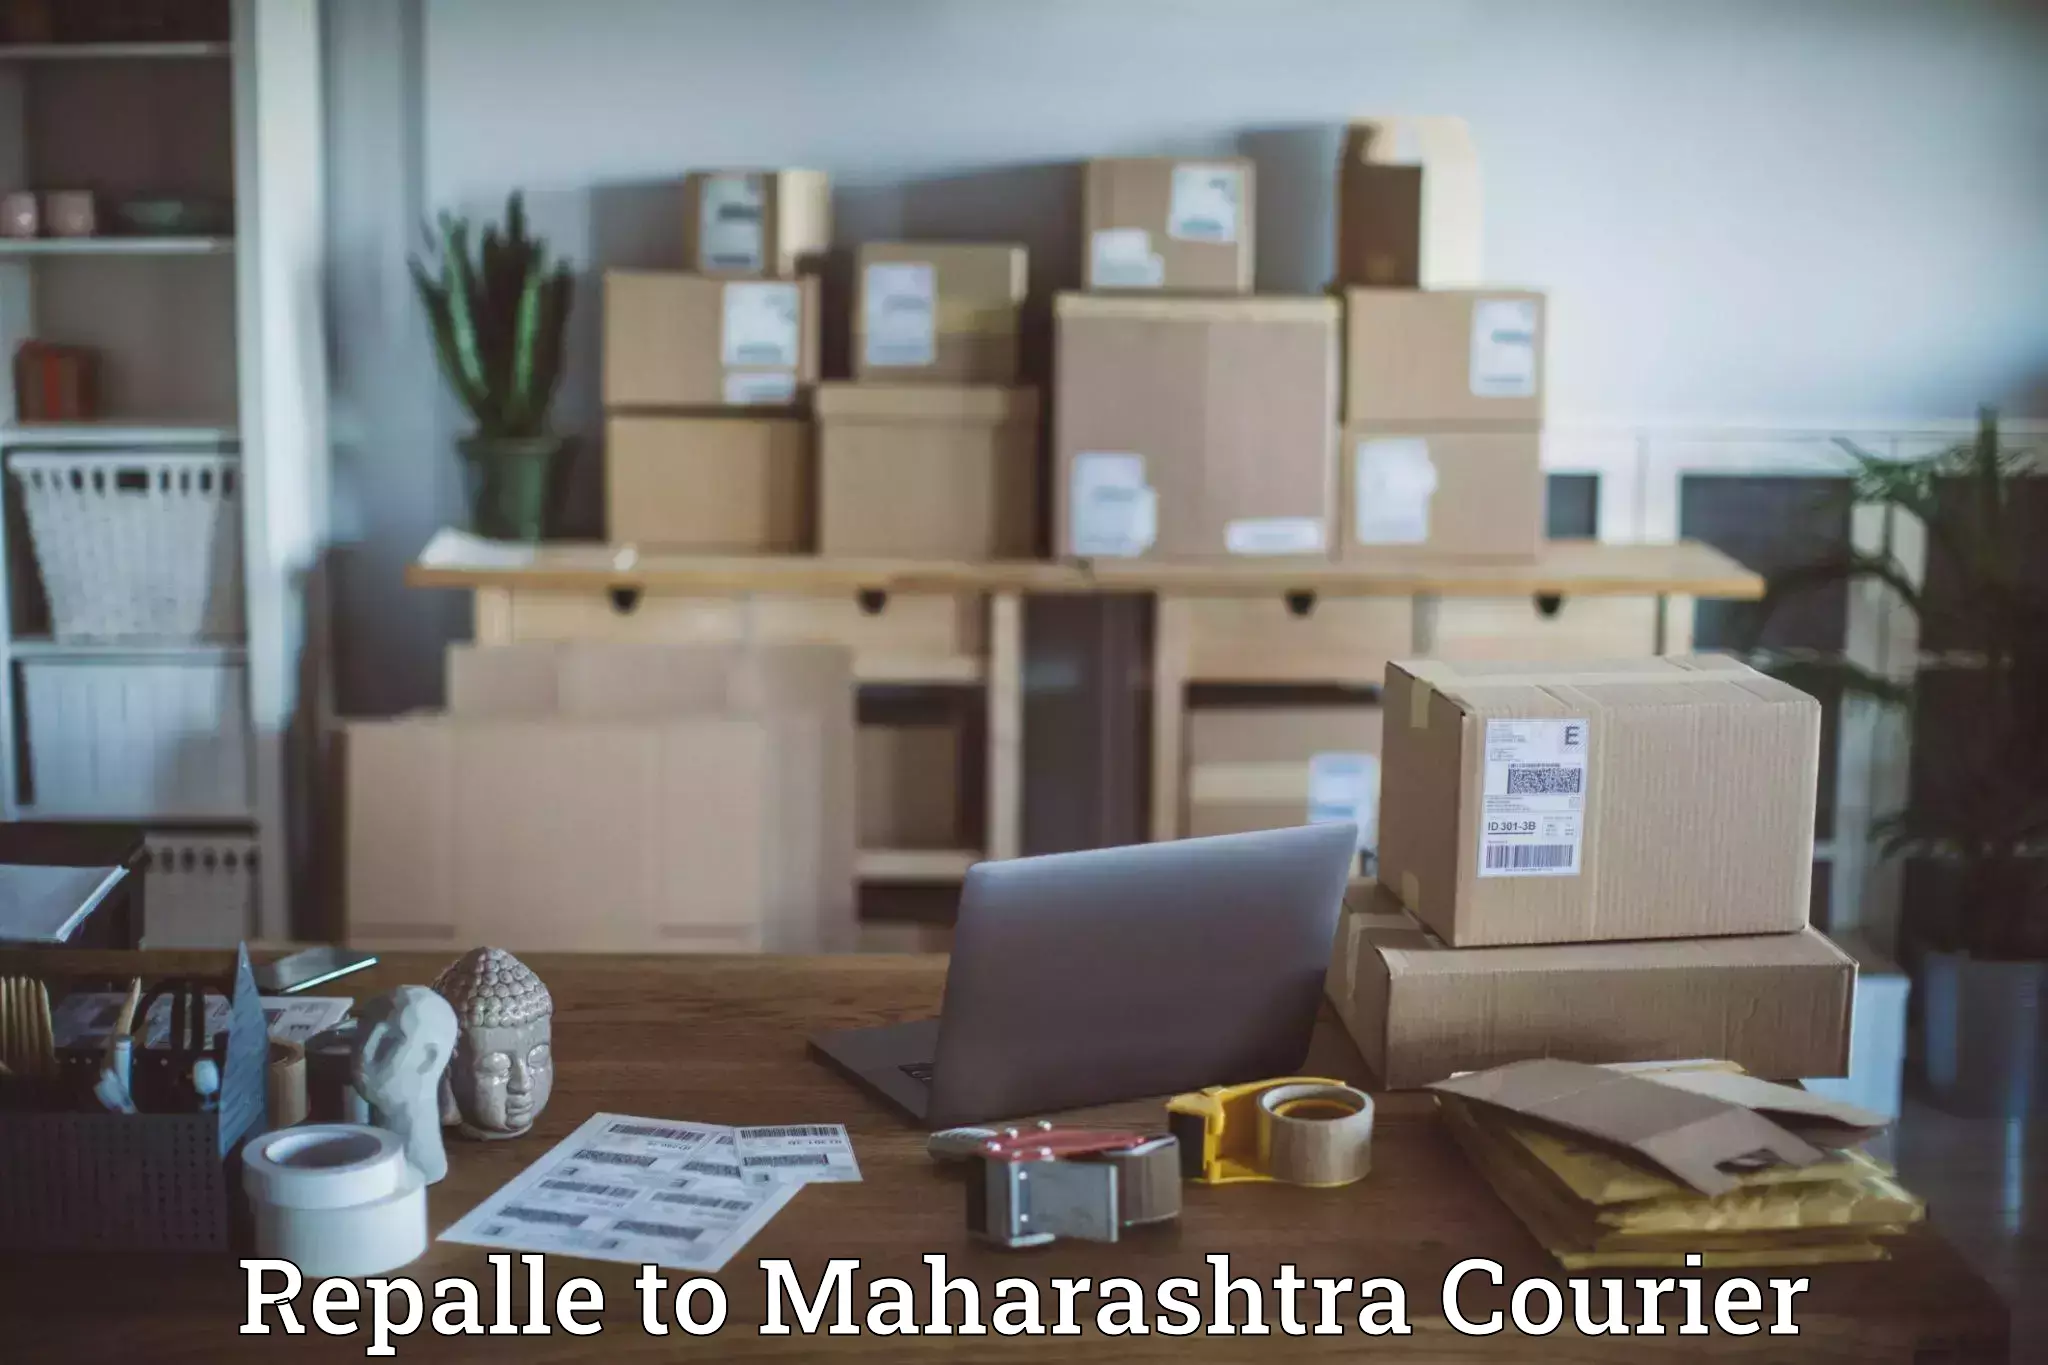 Bulk courier orders Repalle to Loha Nanded